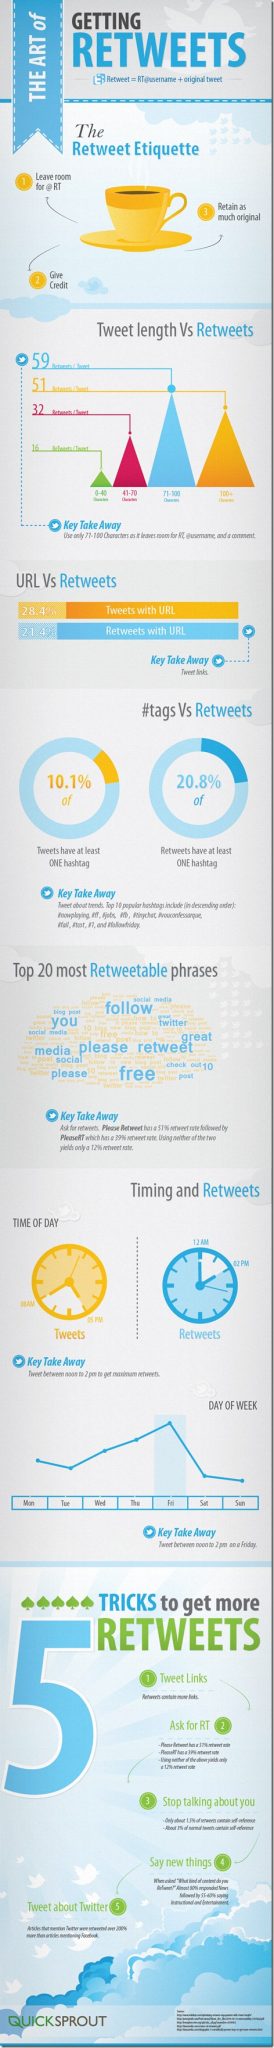 The art of getting Retweets